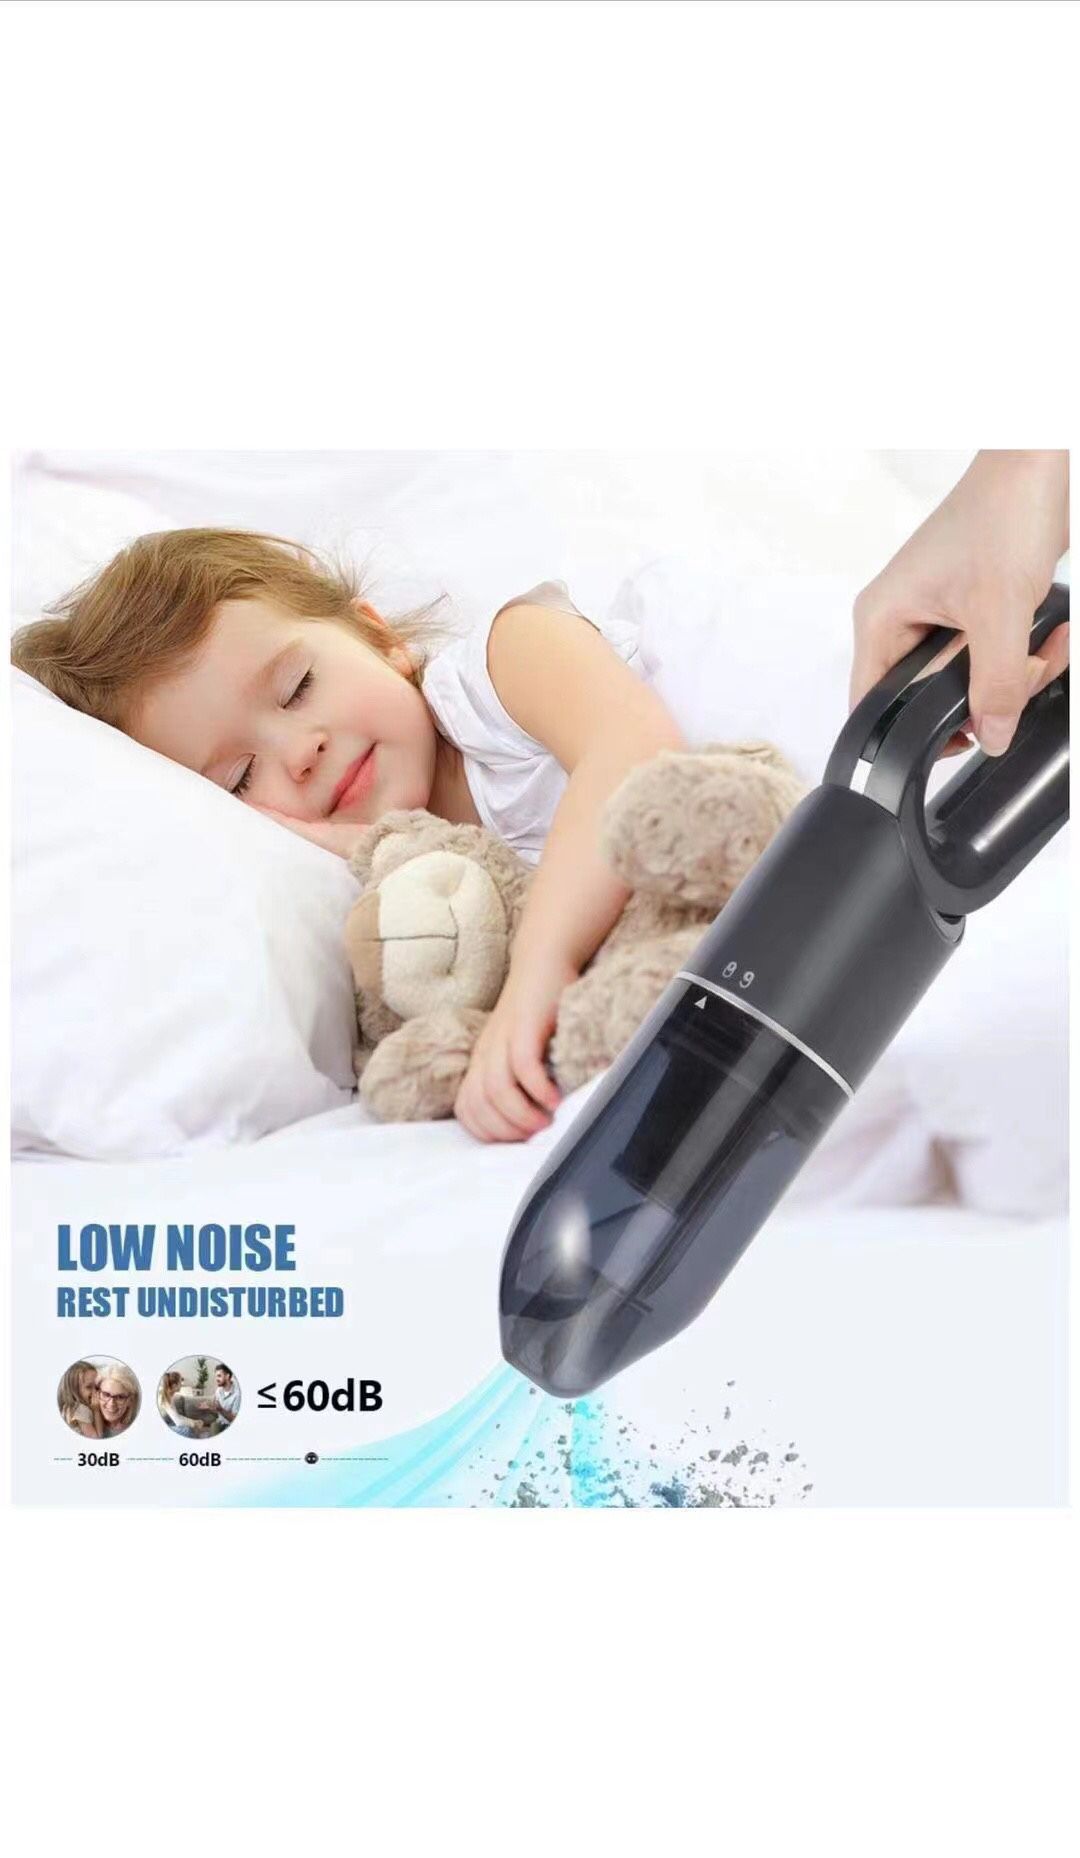 Handheld Vacuum,Car Vacuum,Rechargeable Cordless Stick Vacuum Cleaner,Pet Hair Vacuum, with 7000PA High Power and Quick Charge Portable Vacuum for Hom